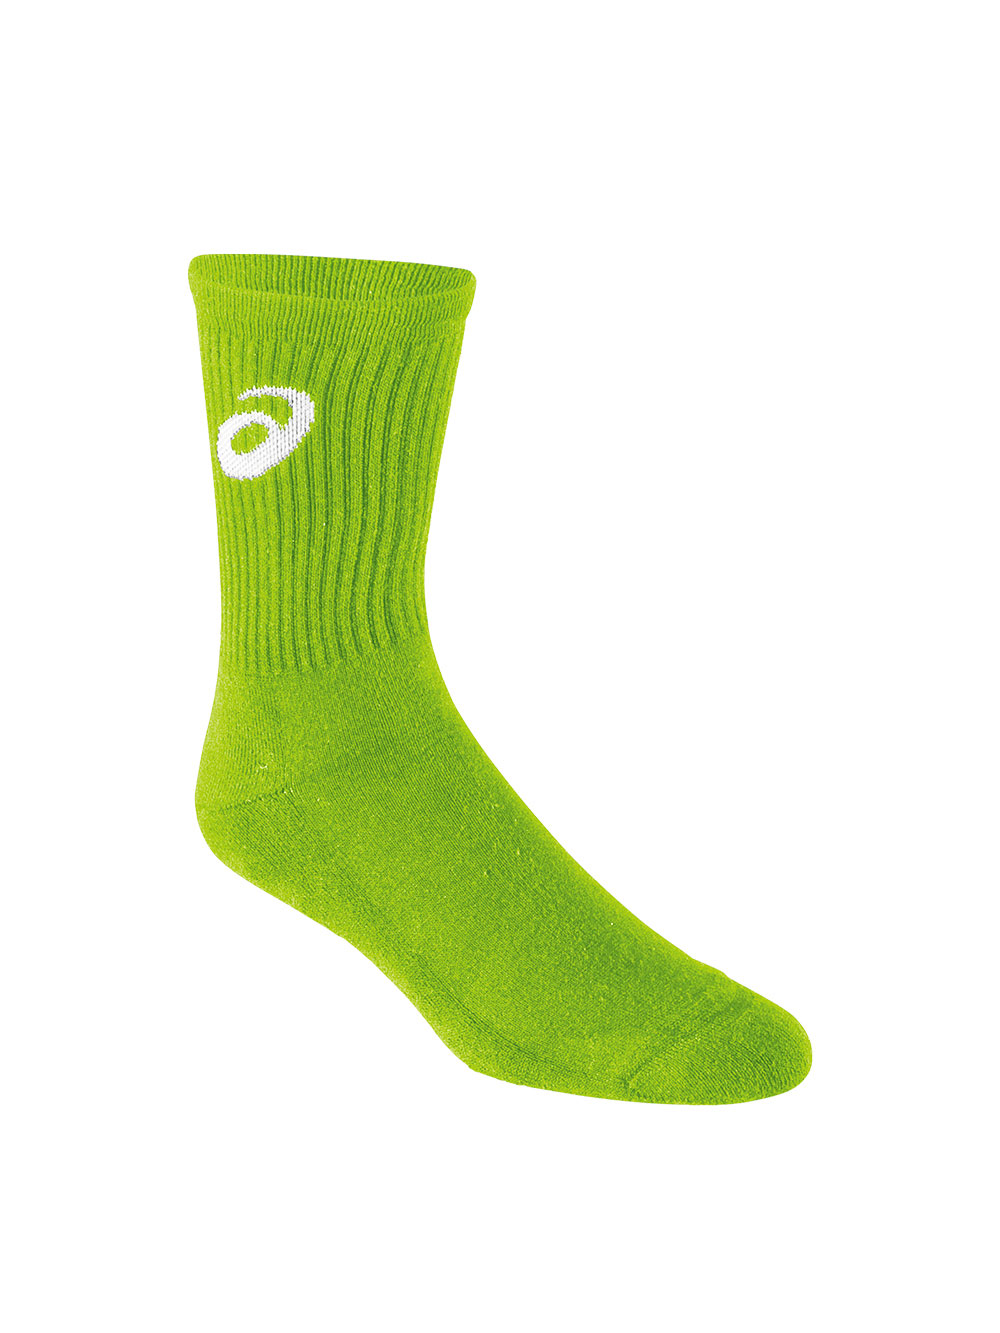 Asics Crew Socks - | Midwest Volleyball